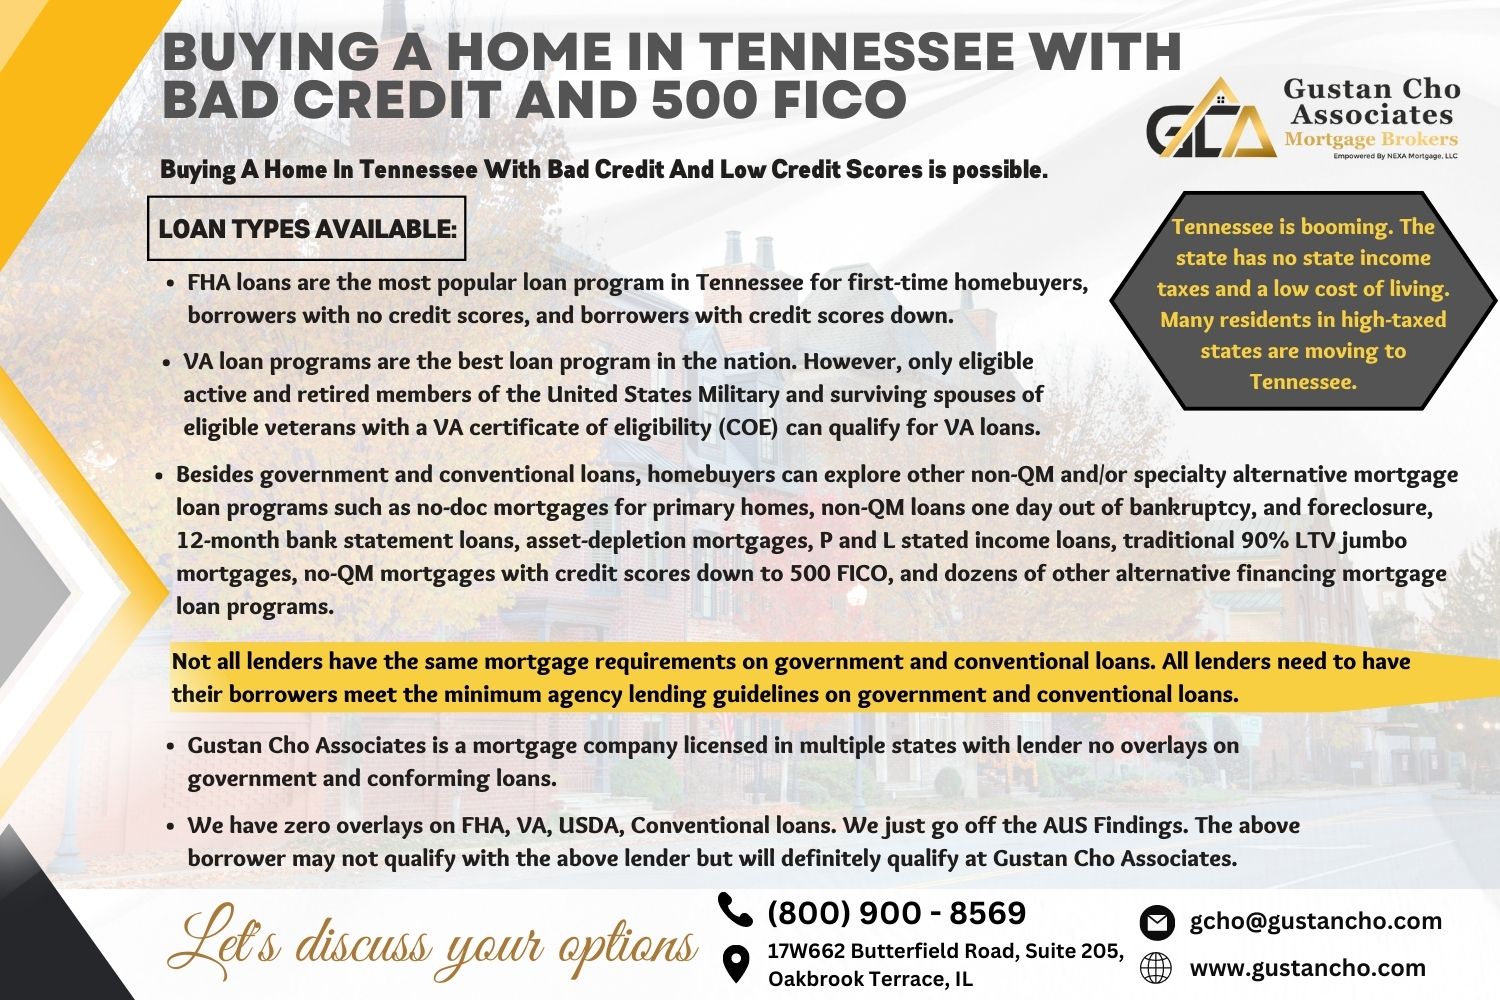 Buying a Home in Tennessee with Bad Credit